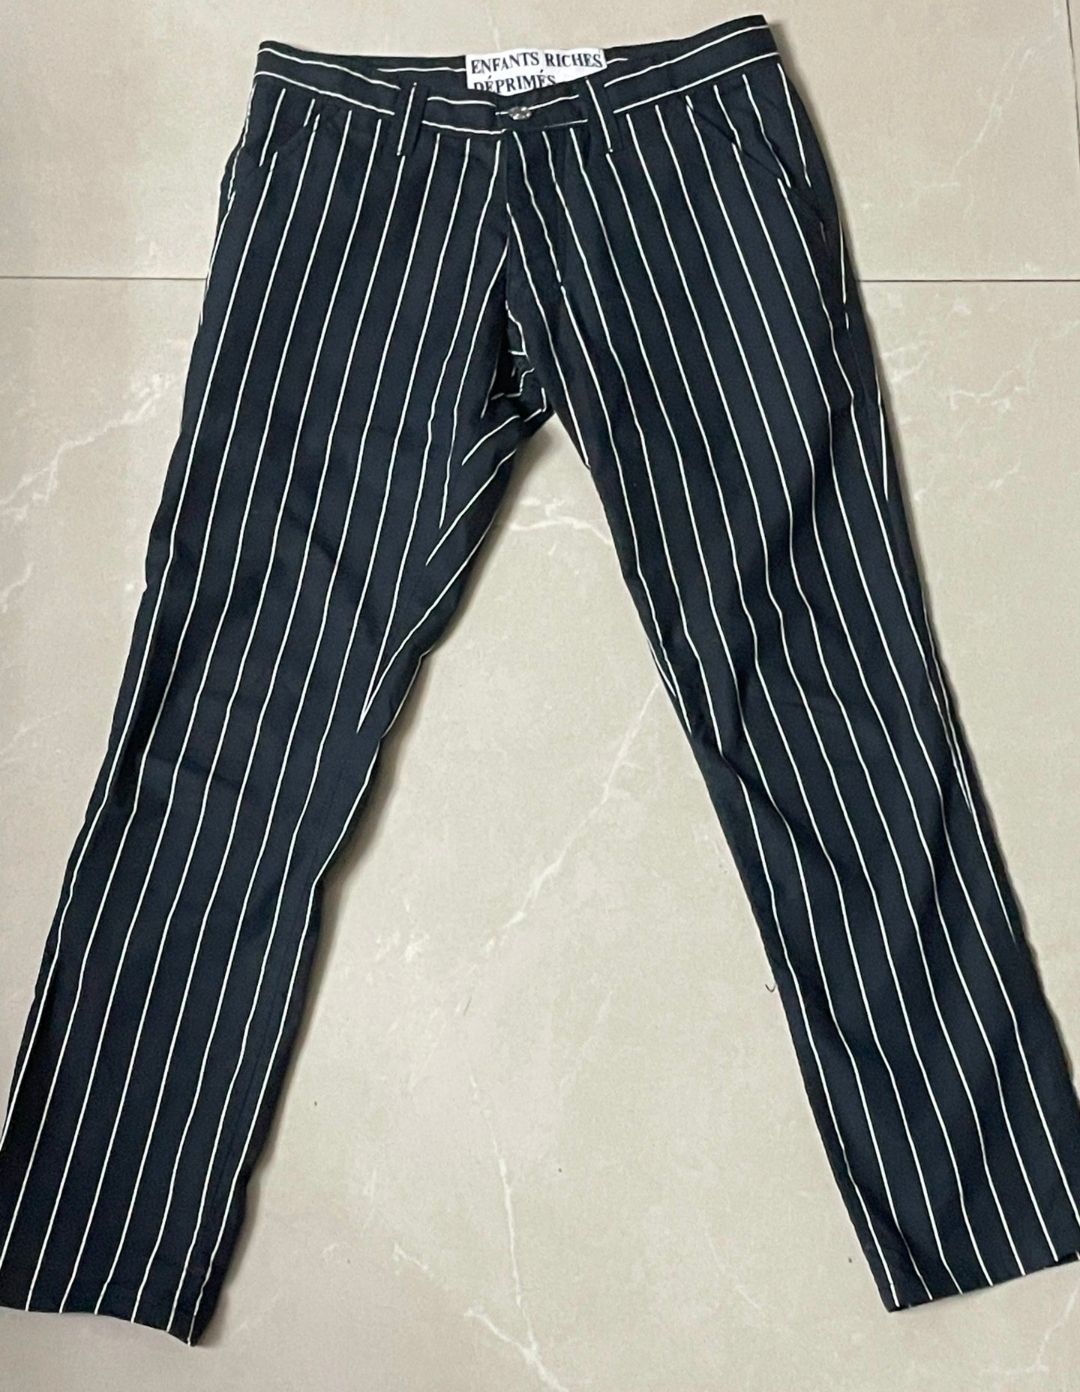 Pre-owned Enfants Riches Deprimes 17ss Striped Western Pants In Black White